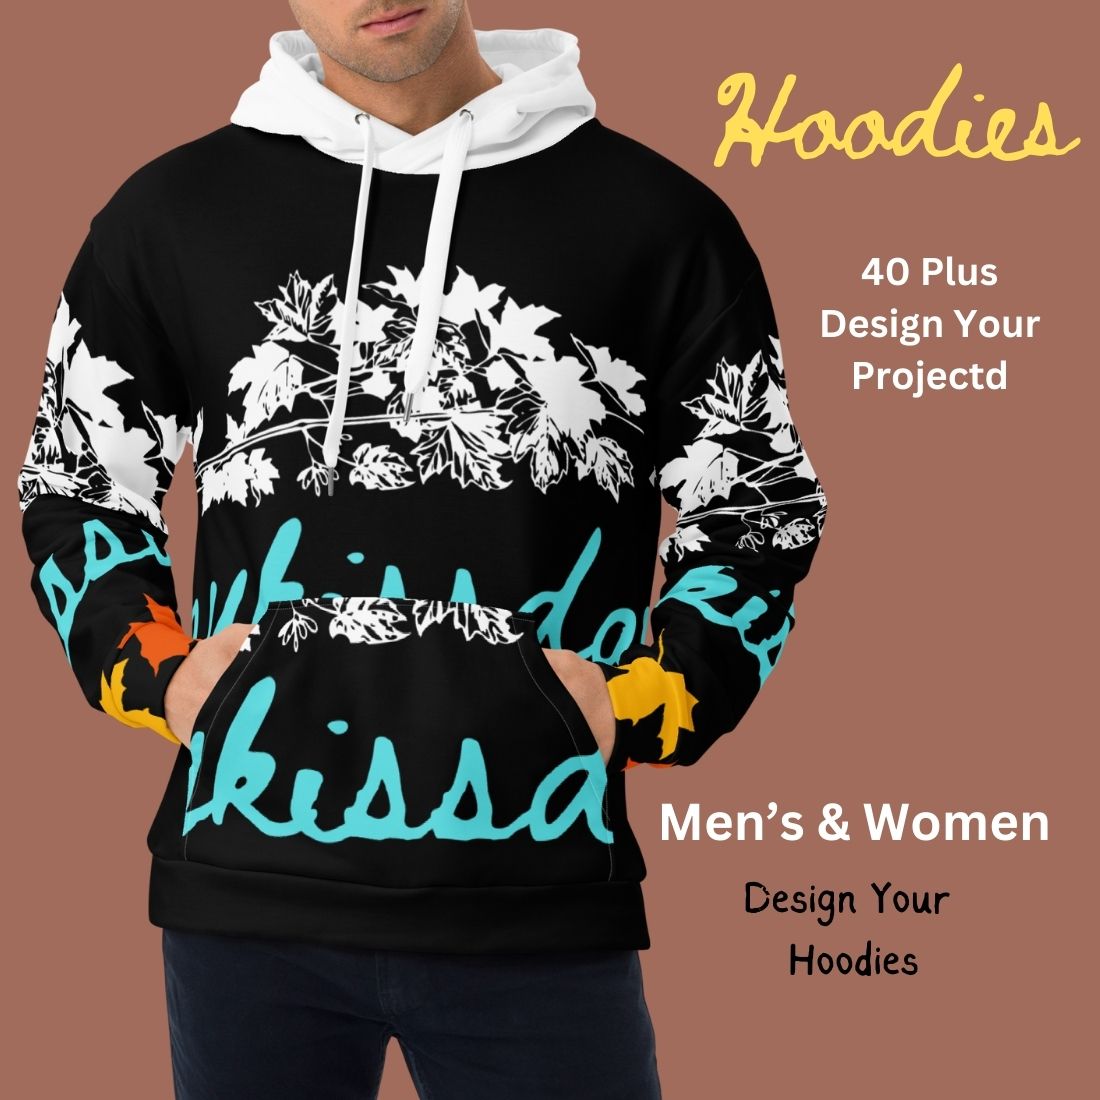 Hoodies for men' s America / Europe / Russian / Australia / Worldwide design for you buy now preview image.